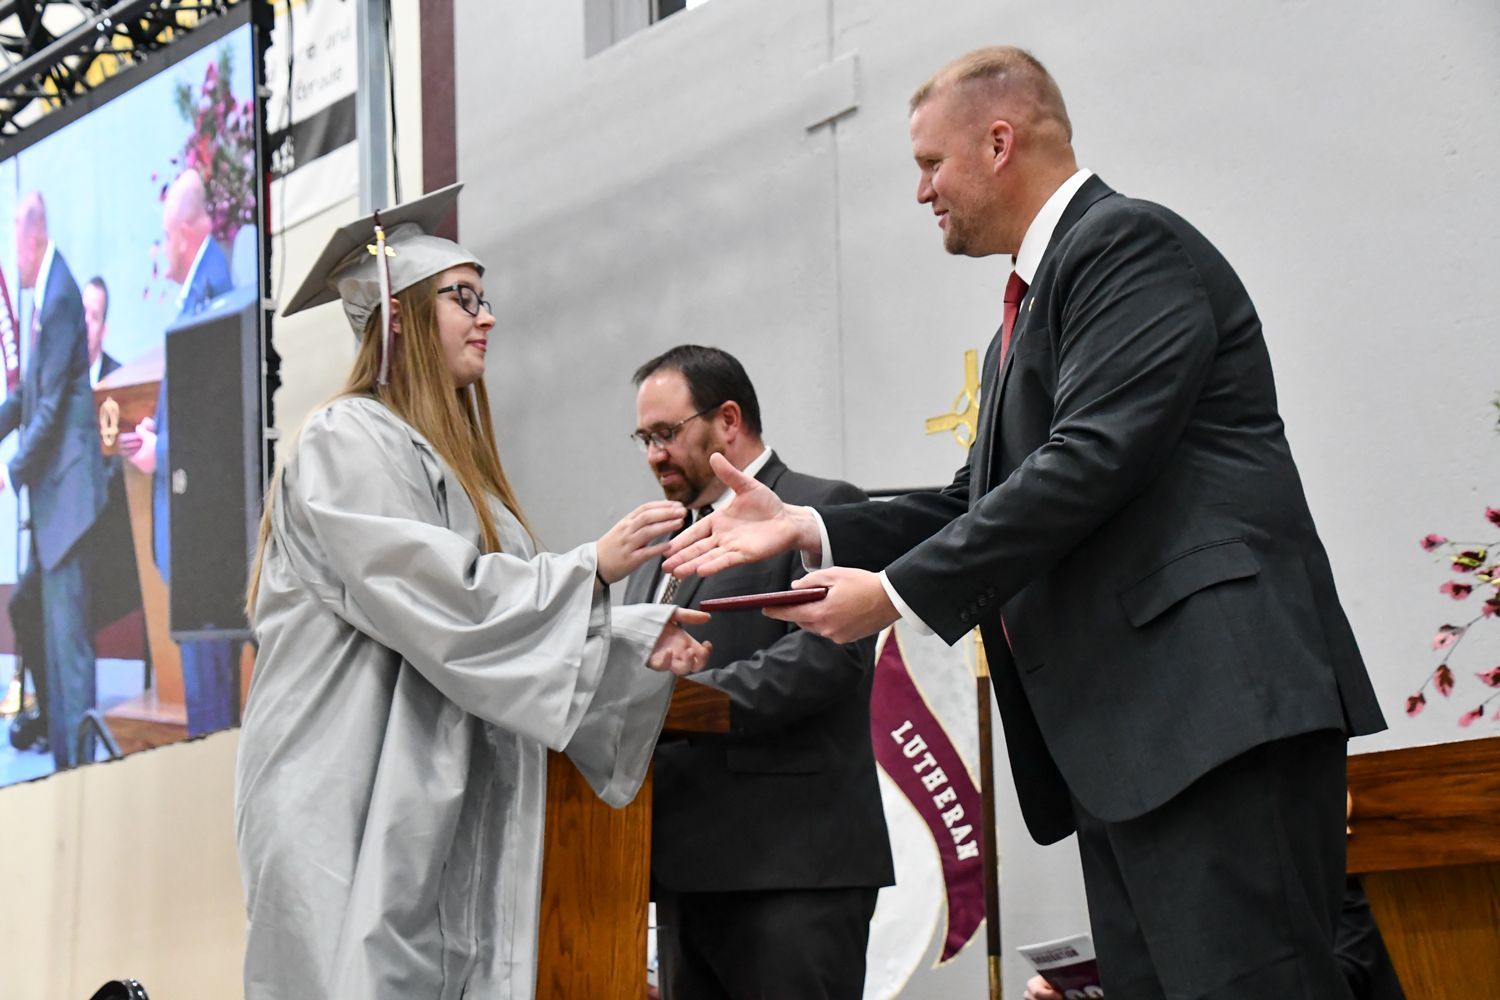 President Loberger shaking the hand of a female student, as he hands her a diploma